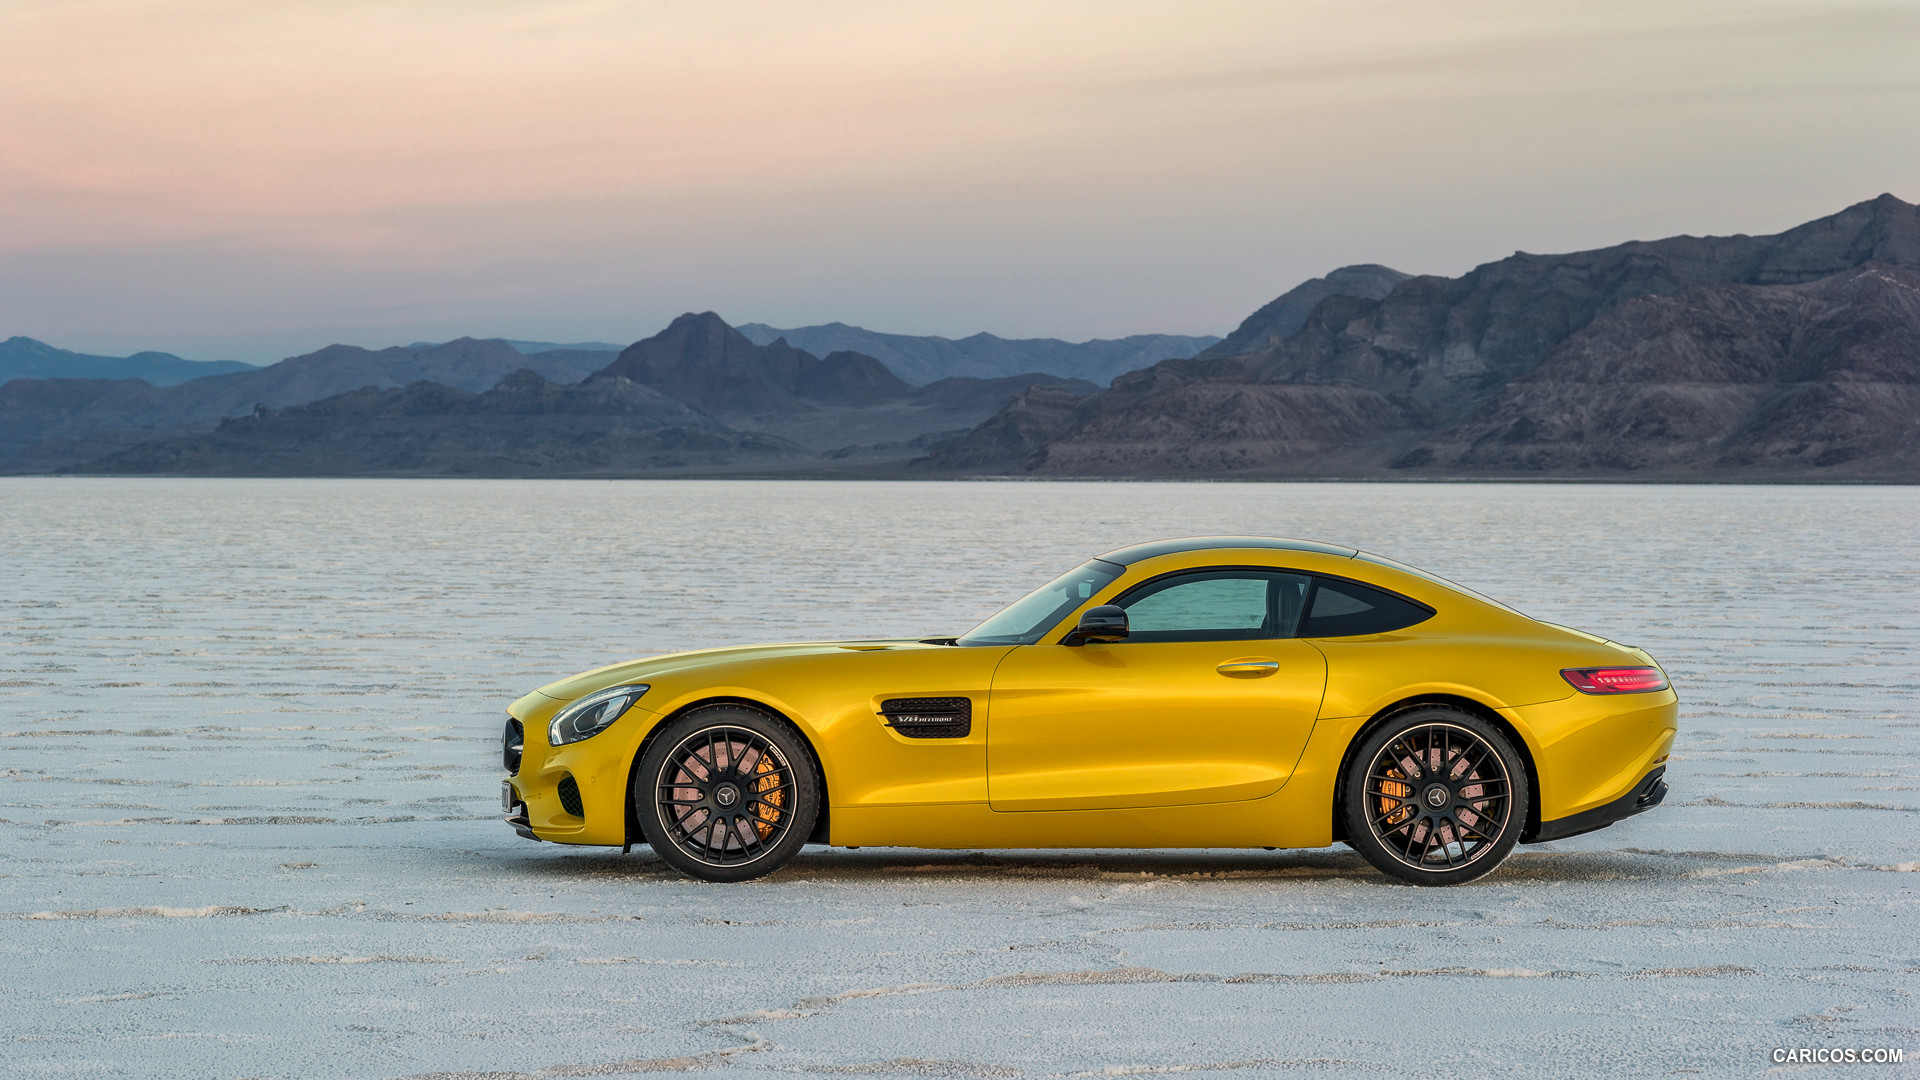 2016 Mercedes-AMG GT (Solarbeam) - Side, #59 of 190